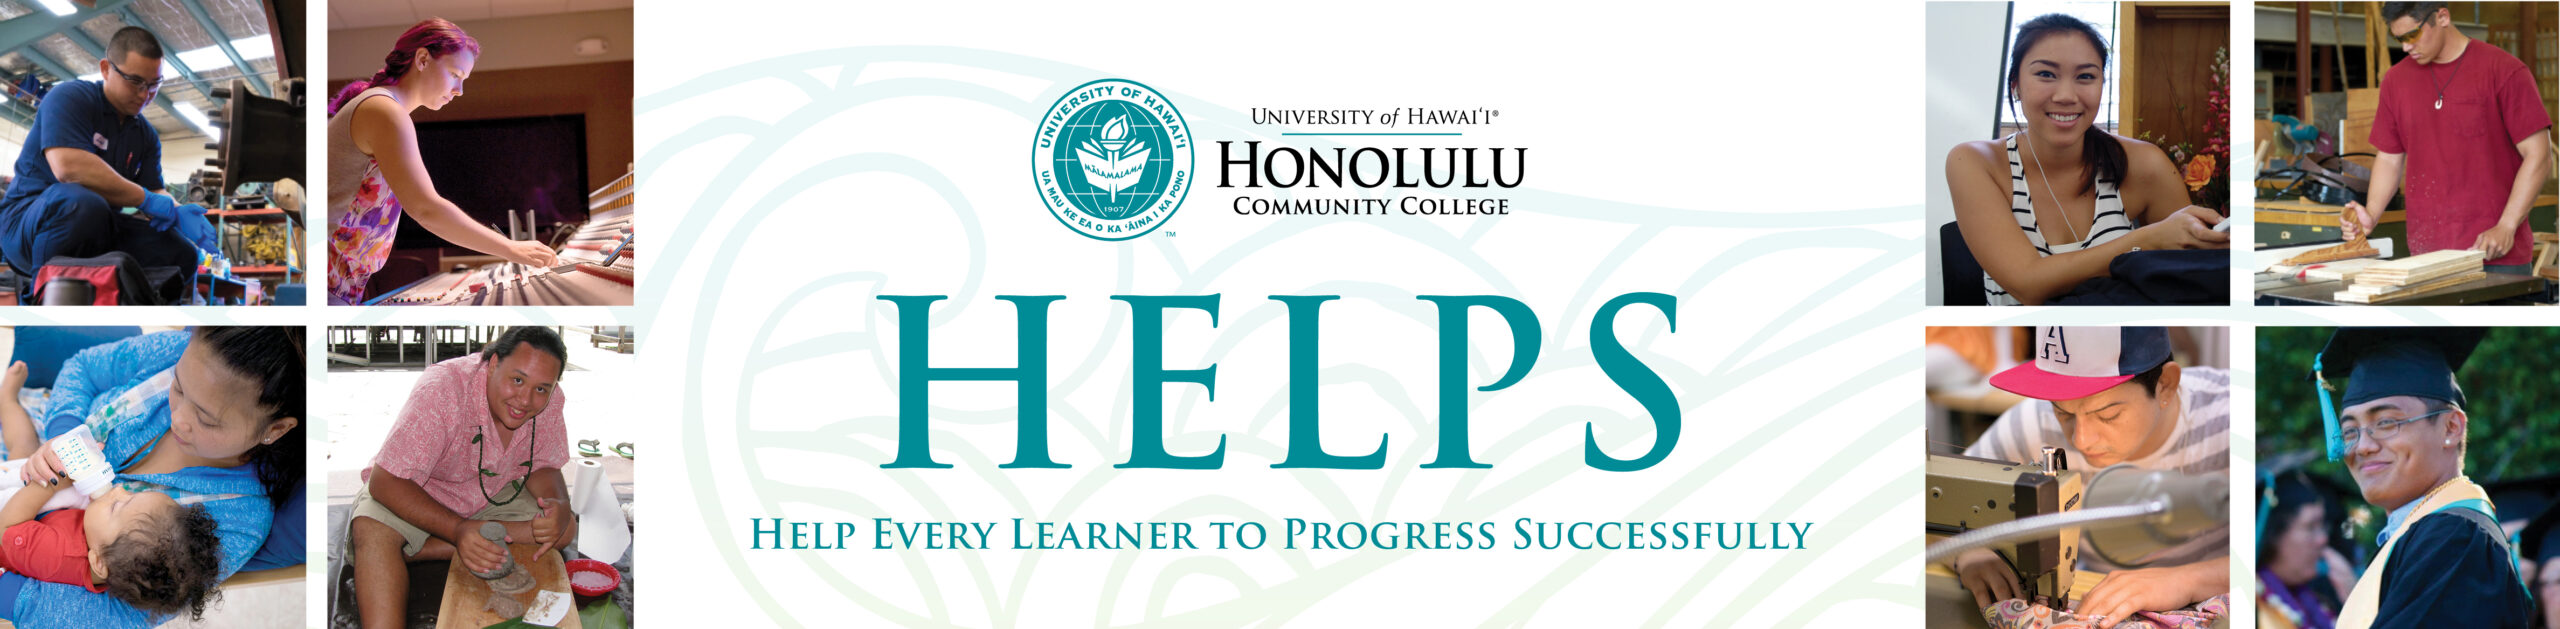 HELPS - Help Every Learner to Progress Successfully.